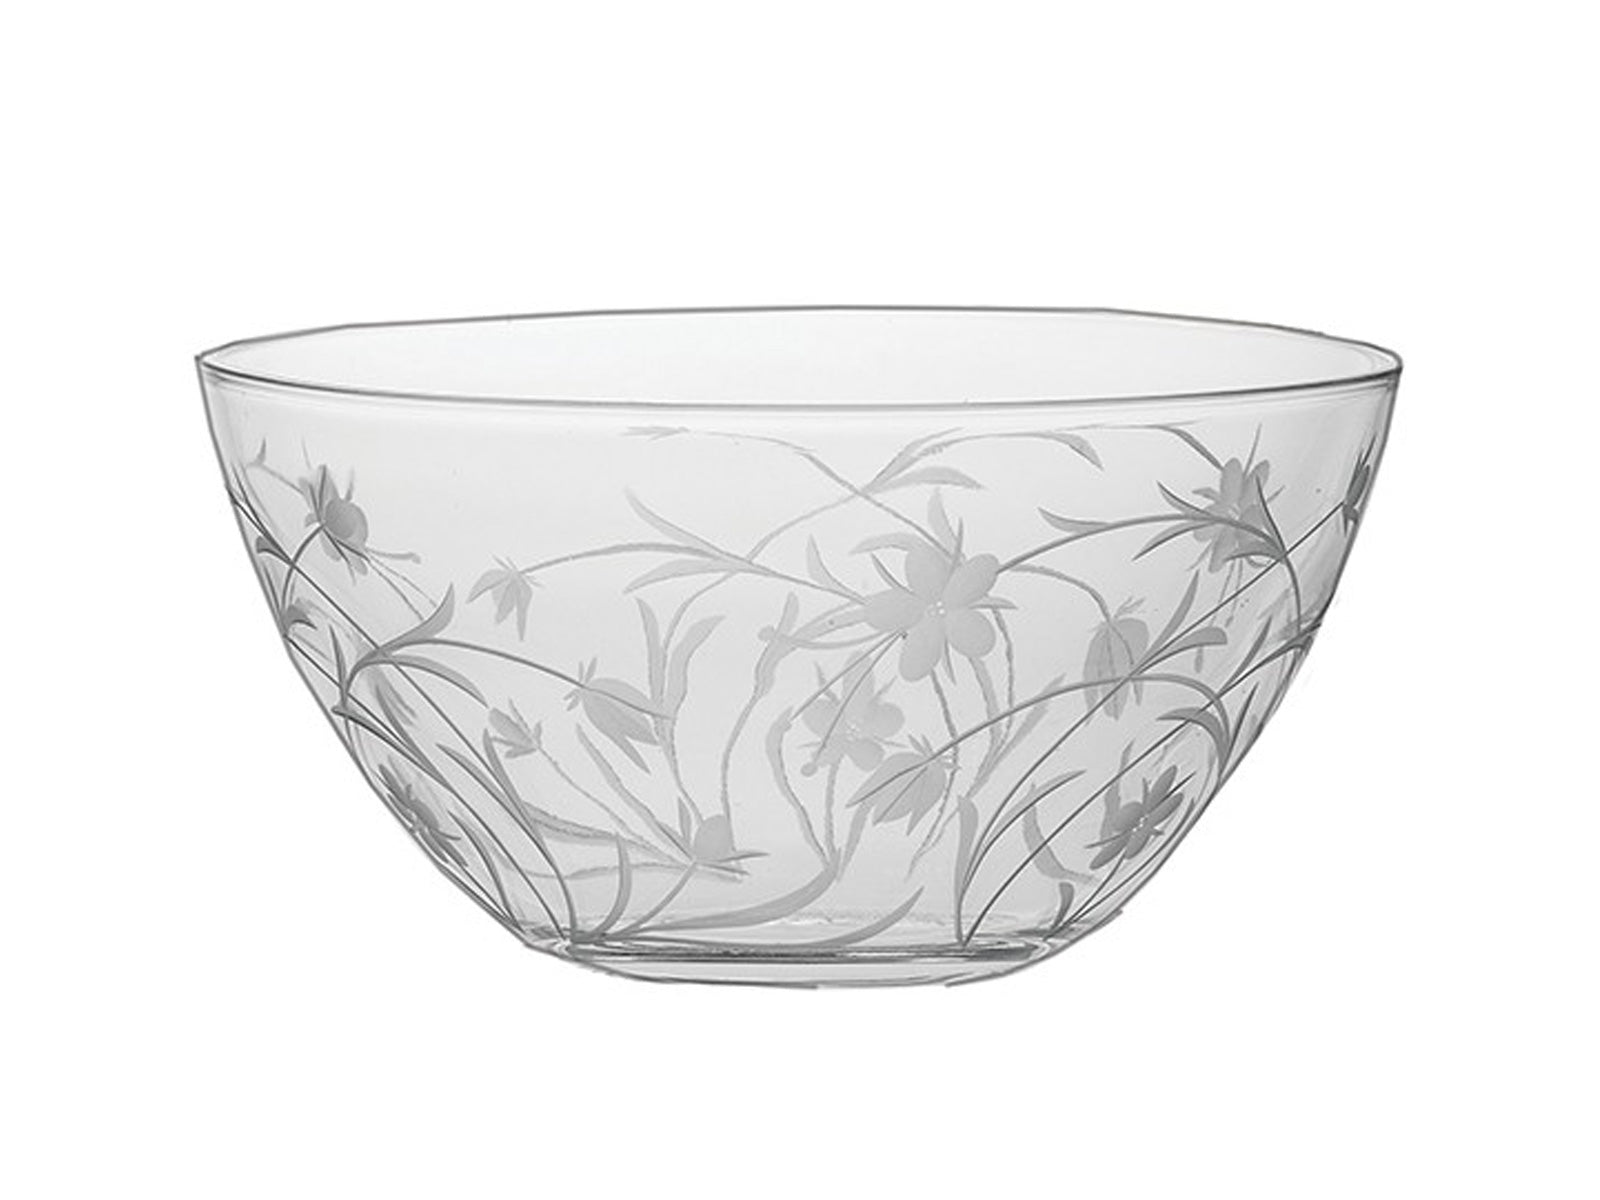 A large crystal bowl with a winding wildflower design engraved in the outside